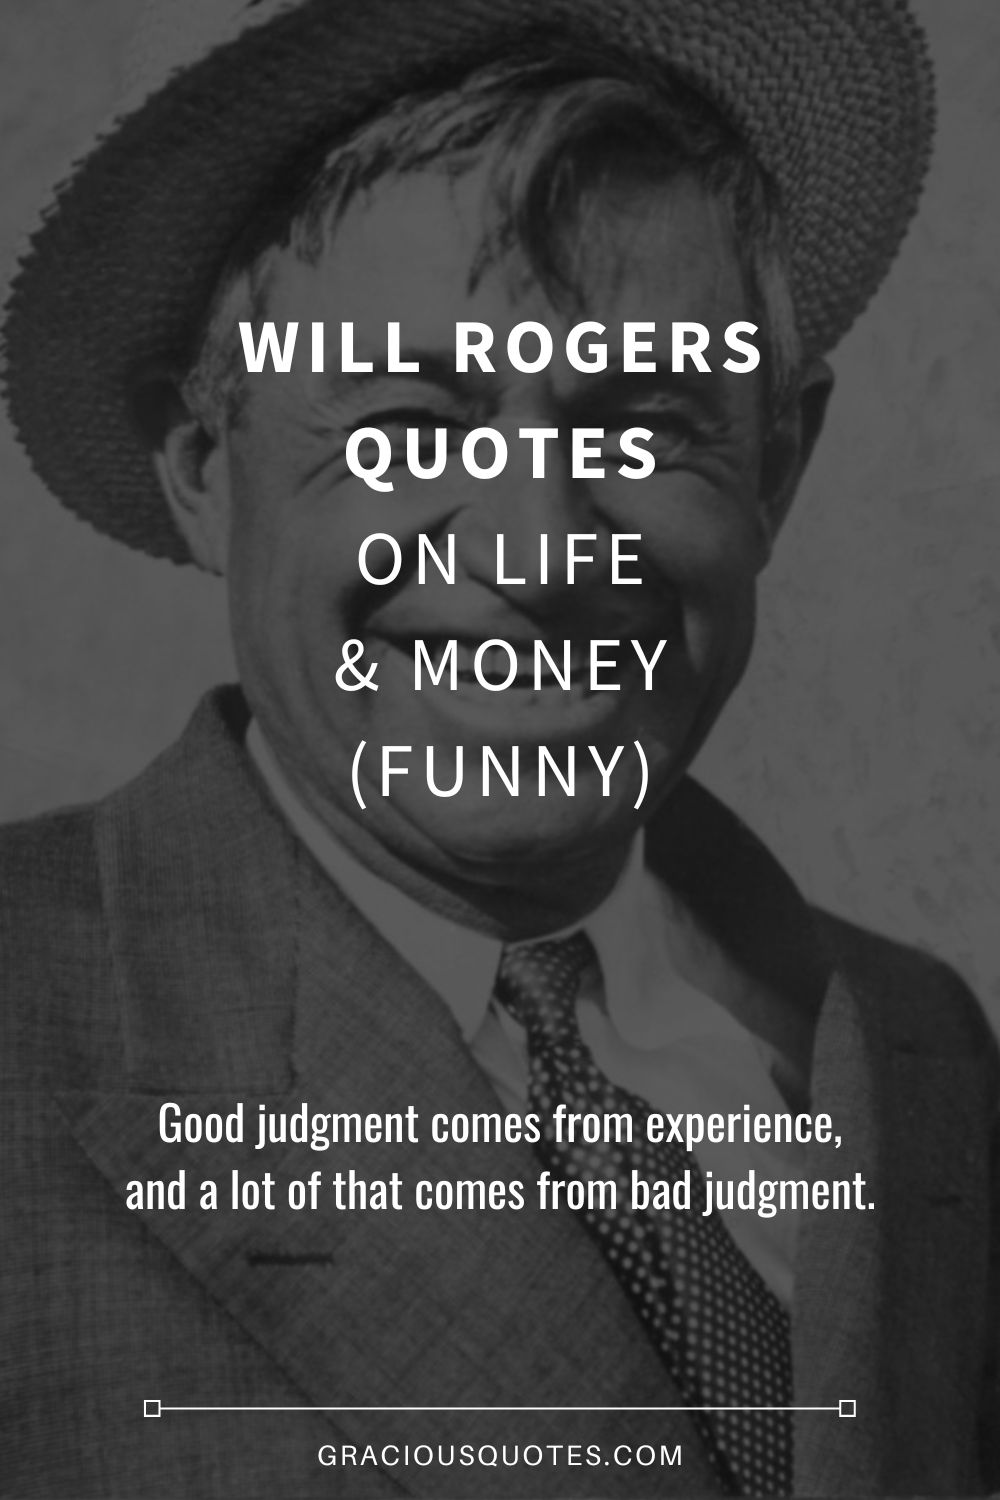 Will Rogers Quotes on Life & Money (FUNNY) - Gracious Quotes